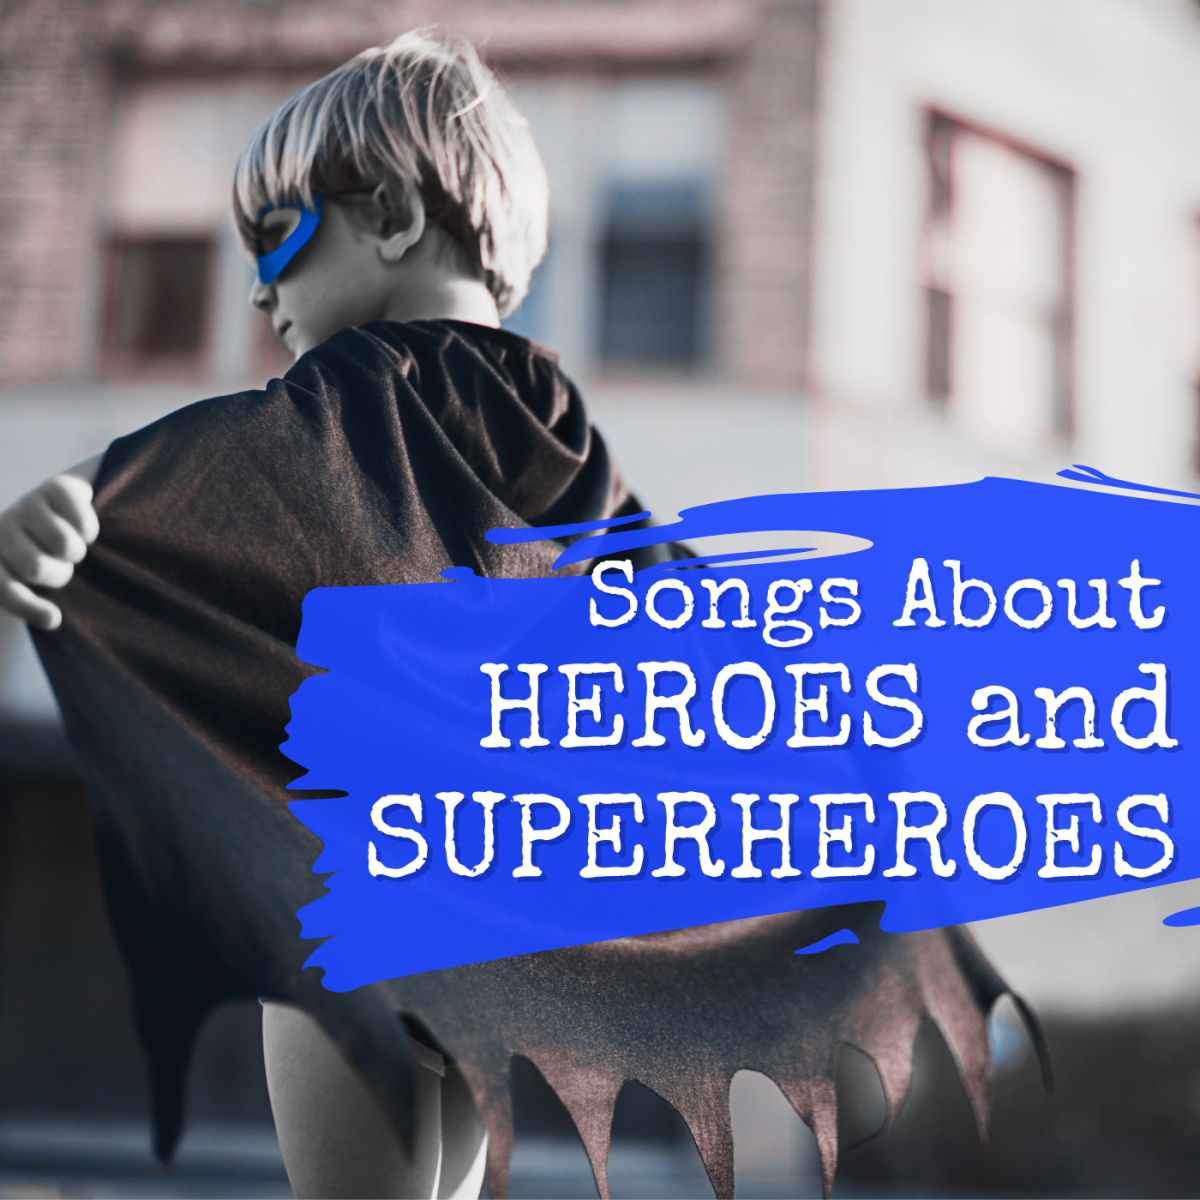 Celebrate the heroes in your life with a customized playlist of pop, rock, and country tunes.